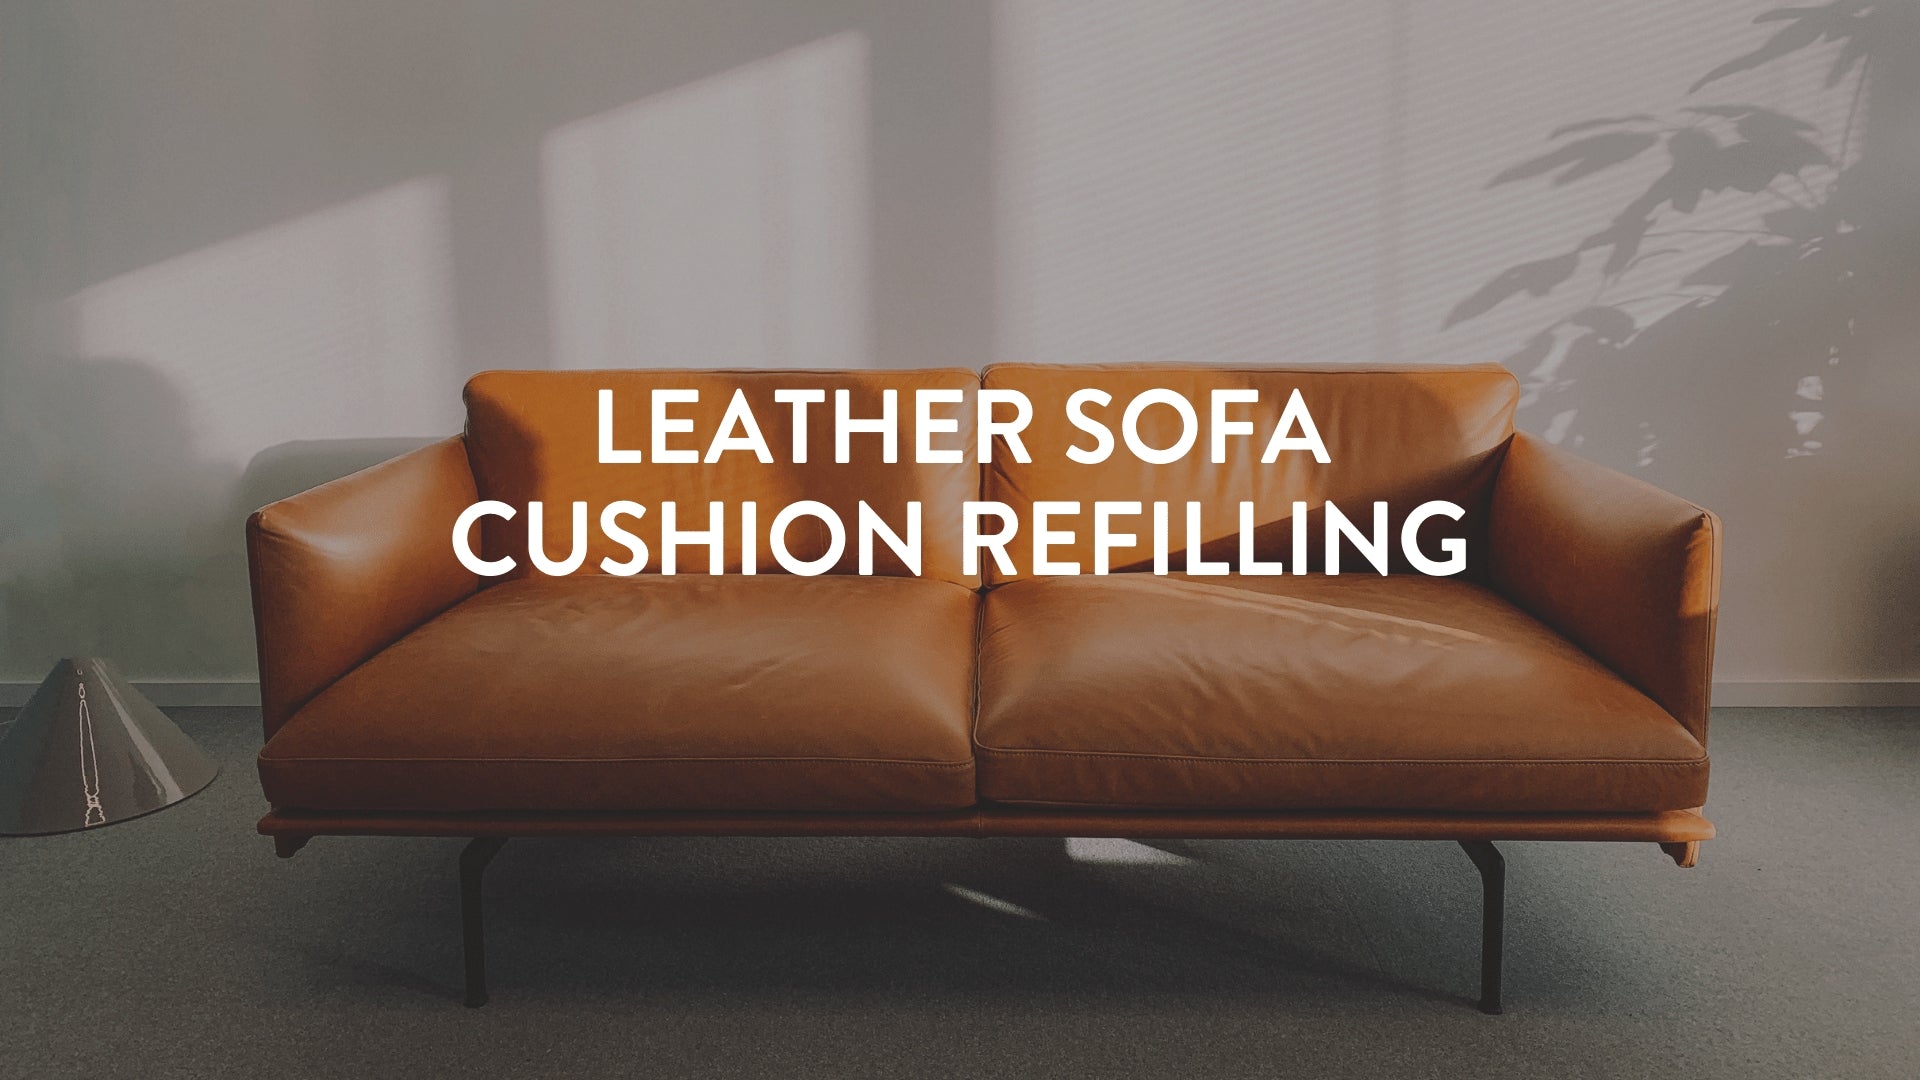 Leather Sofa Cushion Refilling - Restore your leather sofa. – Putnams